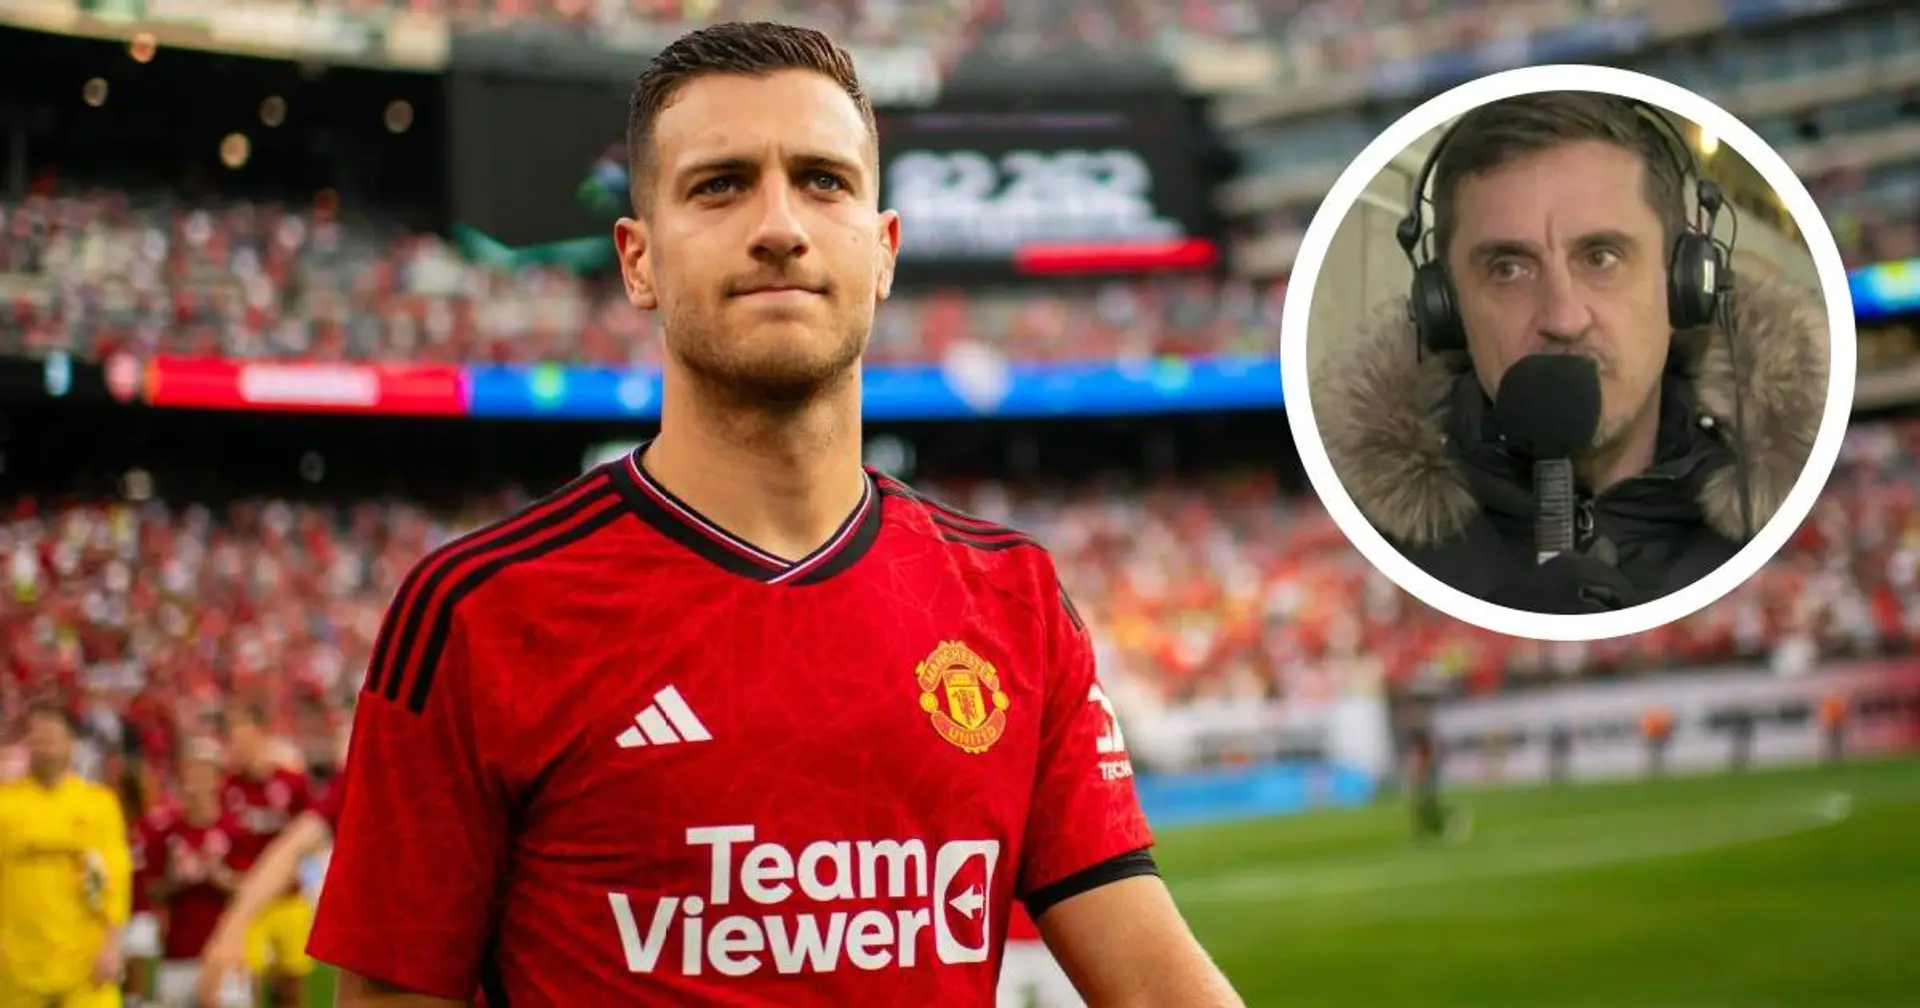 Gary Neville on Diogo Dalot: 'Is he the best in the world? No'